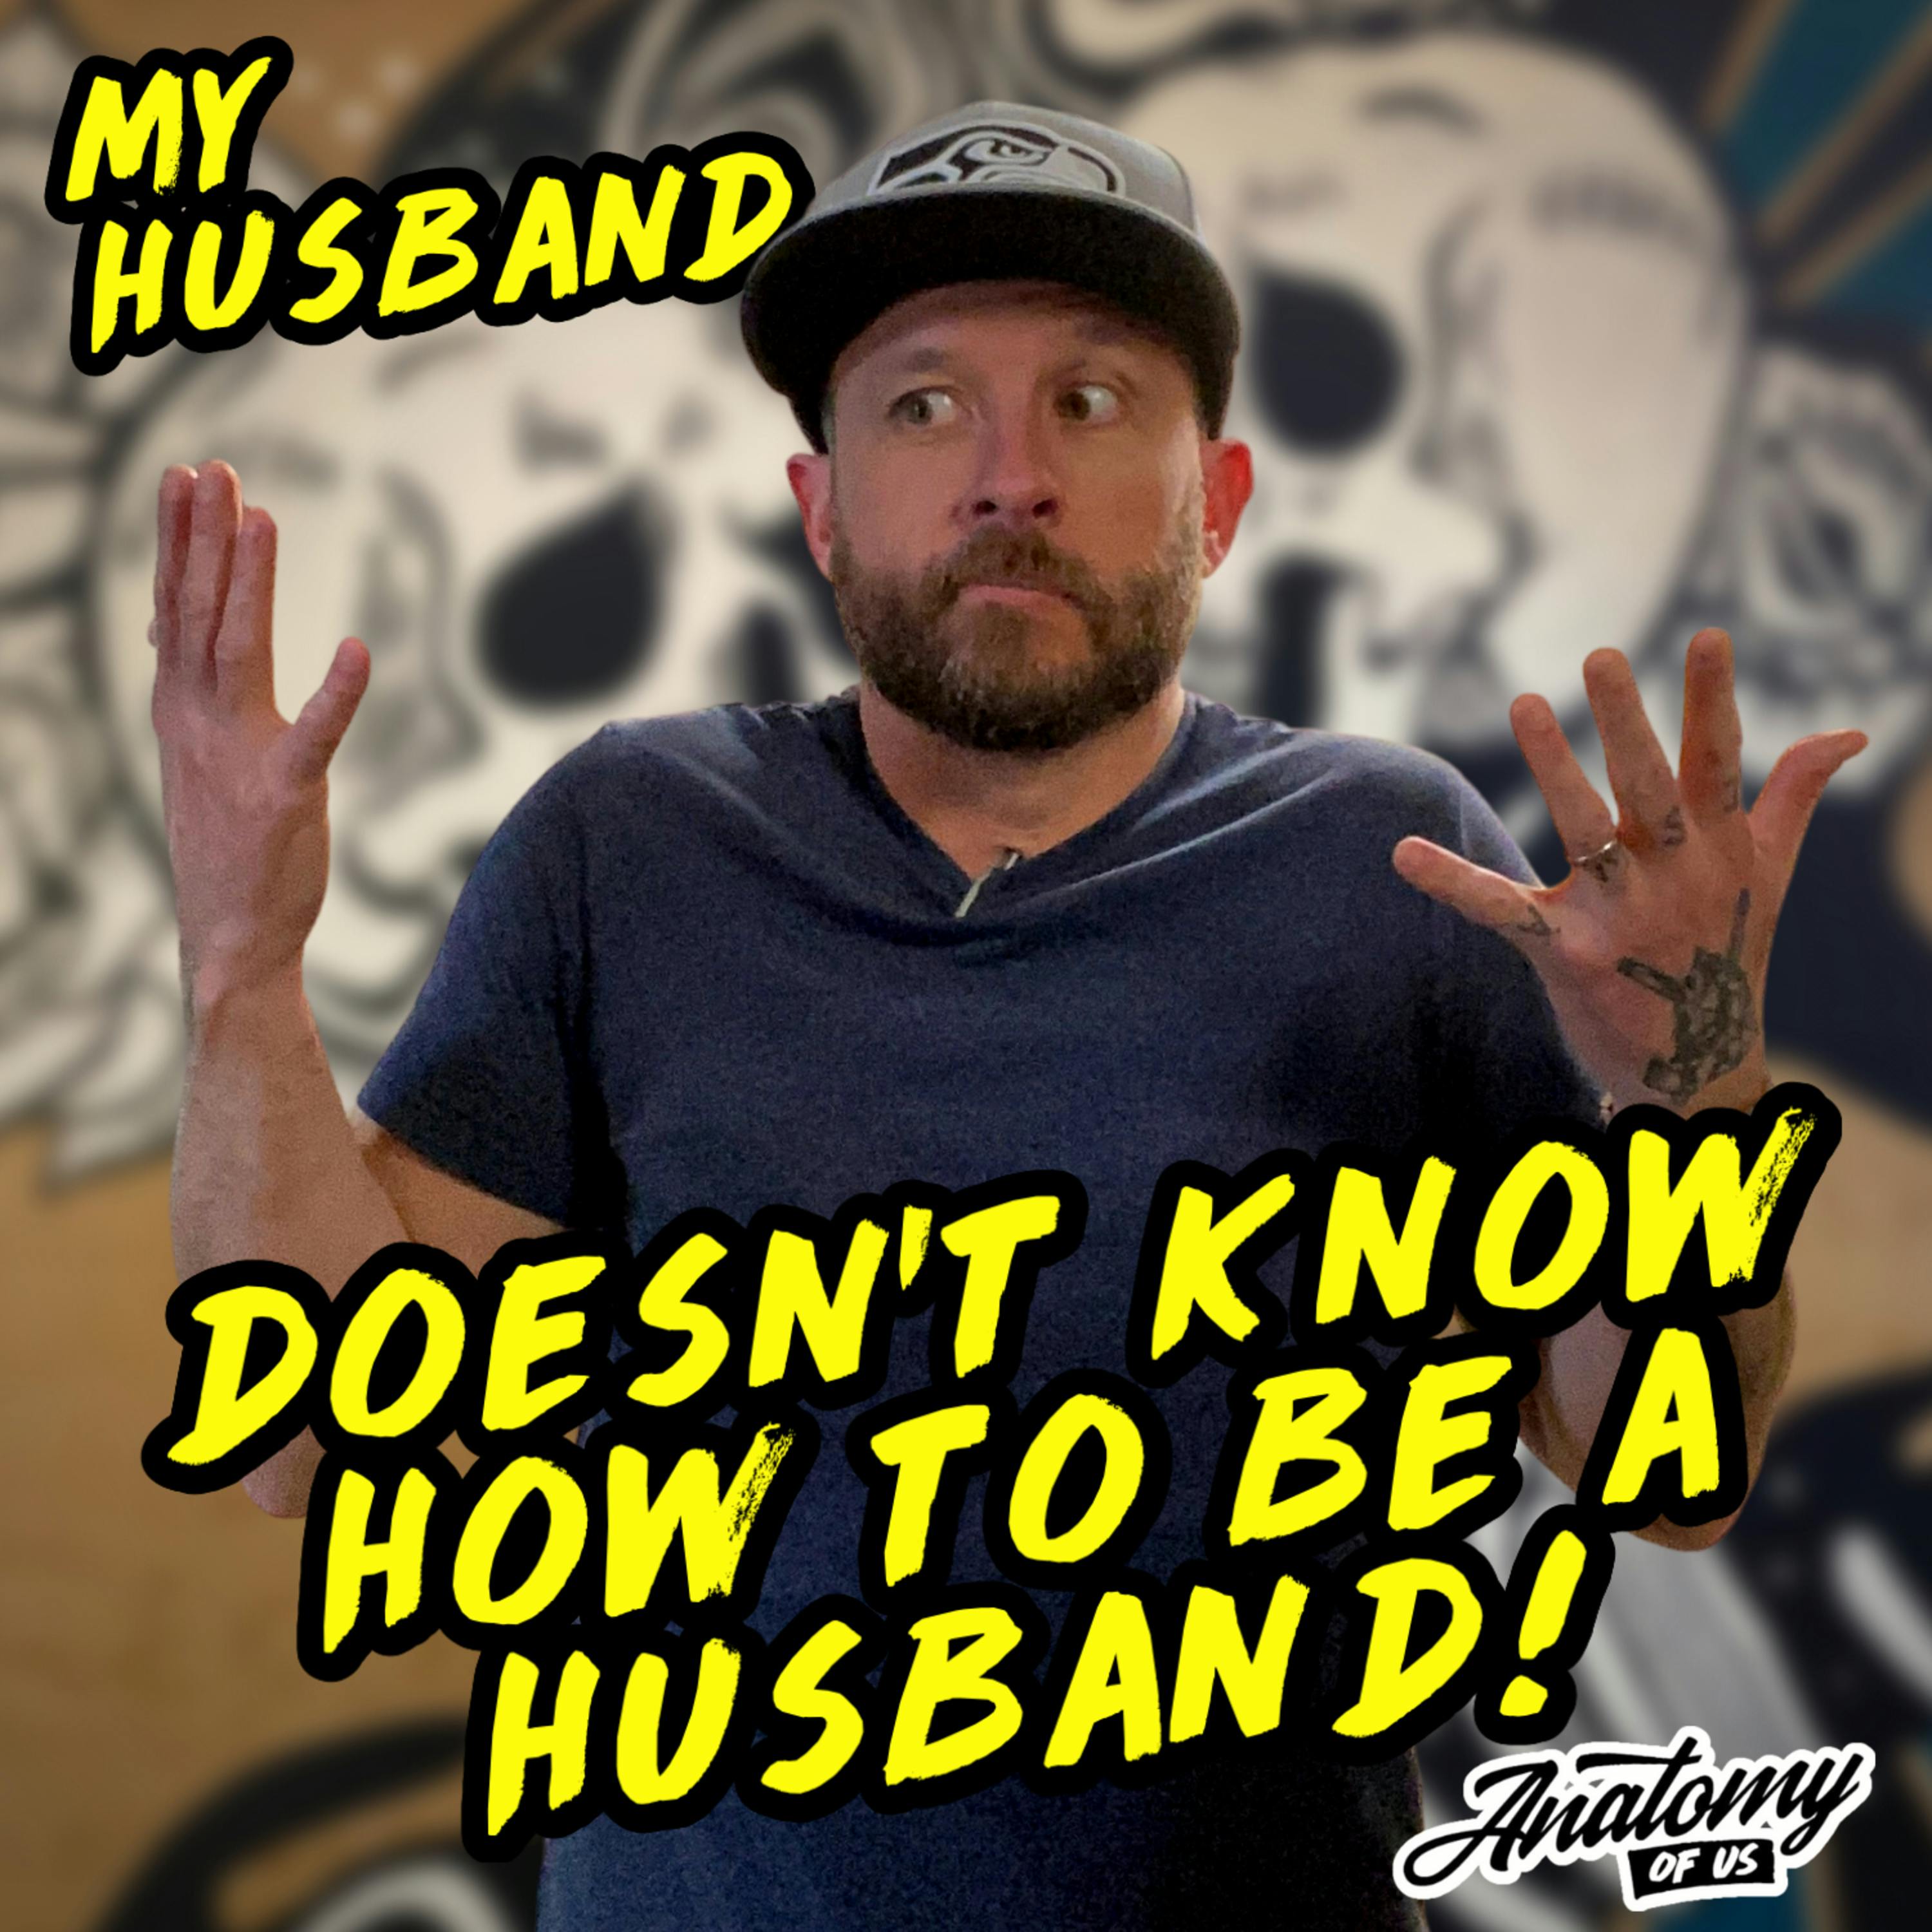 My Husband Doesn't Know How to be a Husband